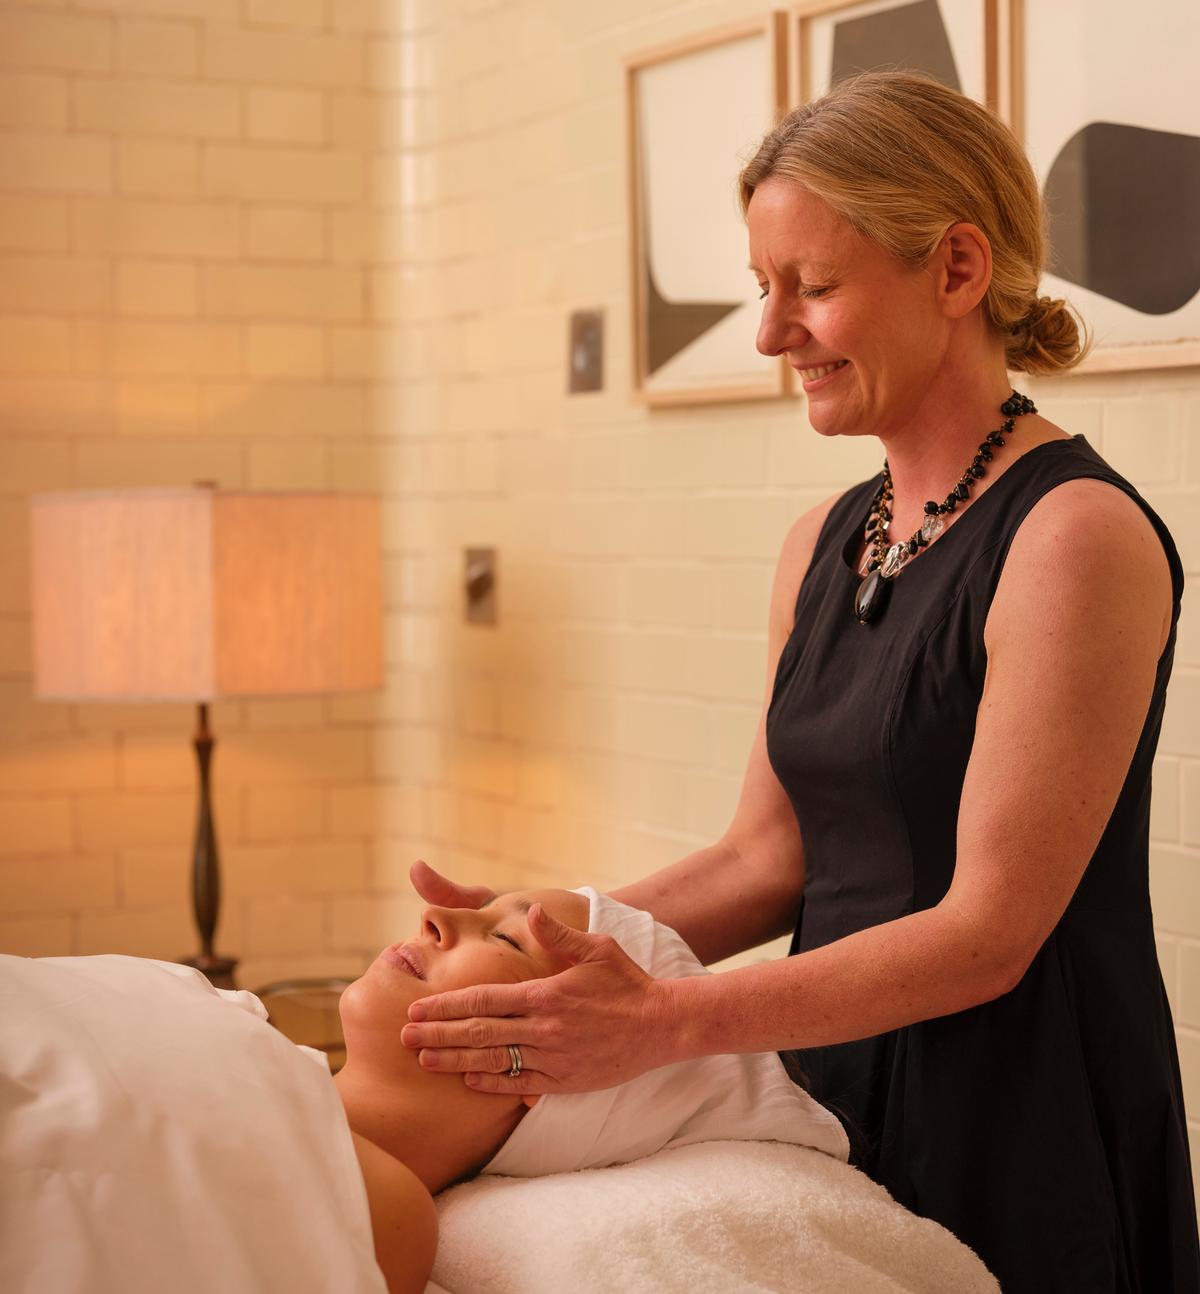 In booking the exclusive Signature Treatment (£350, €409, US$488), guests will experience a ritual practised by de Mamiel founder Annee de Mamiel